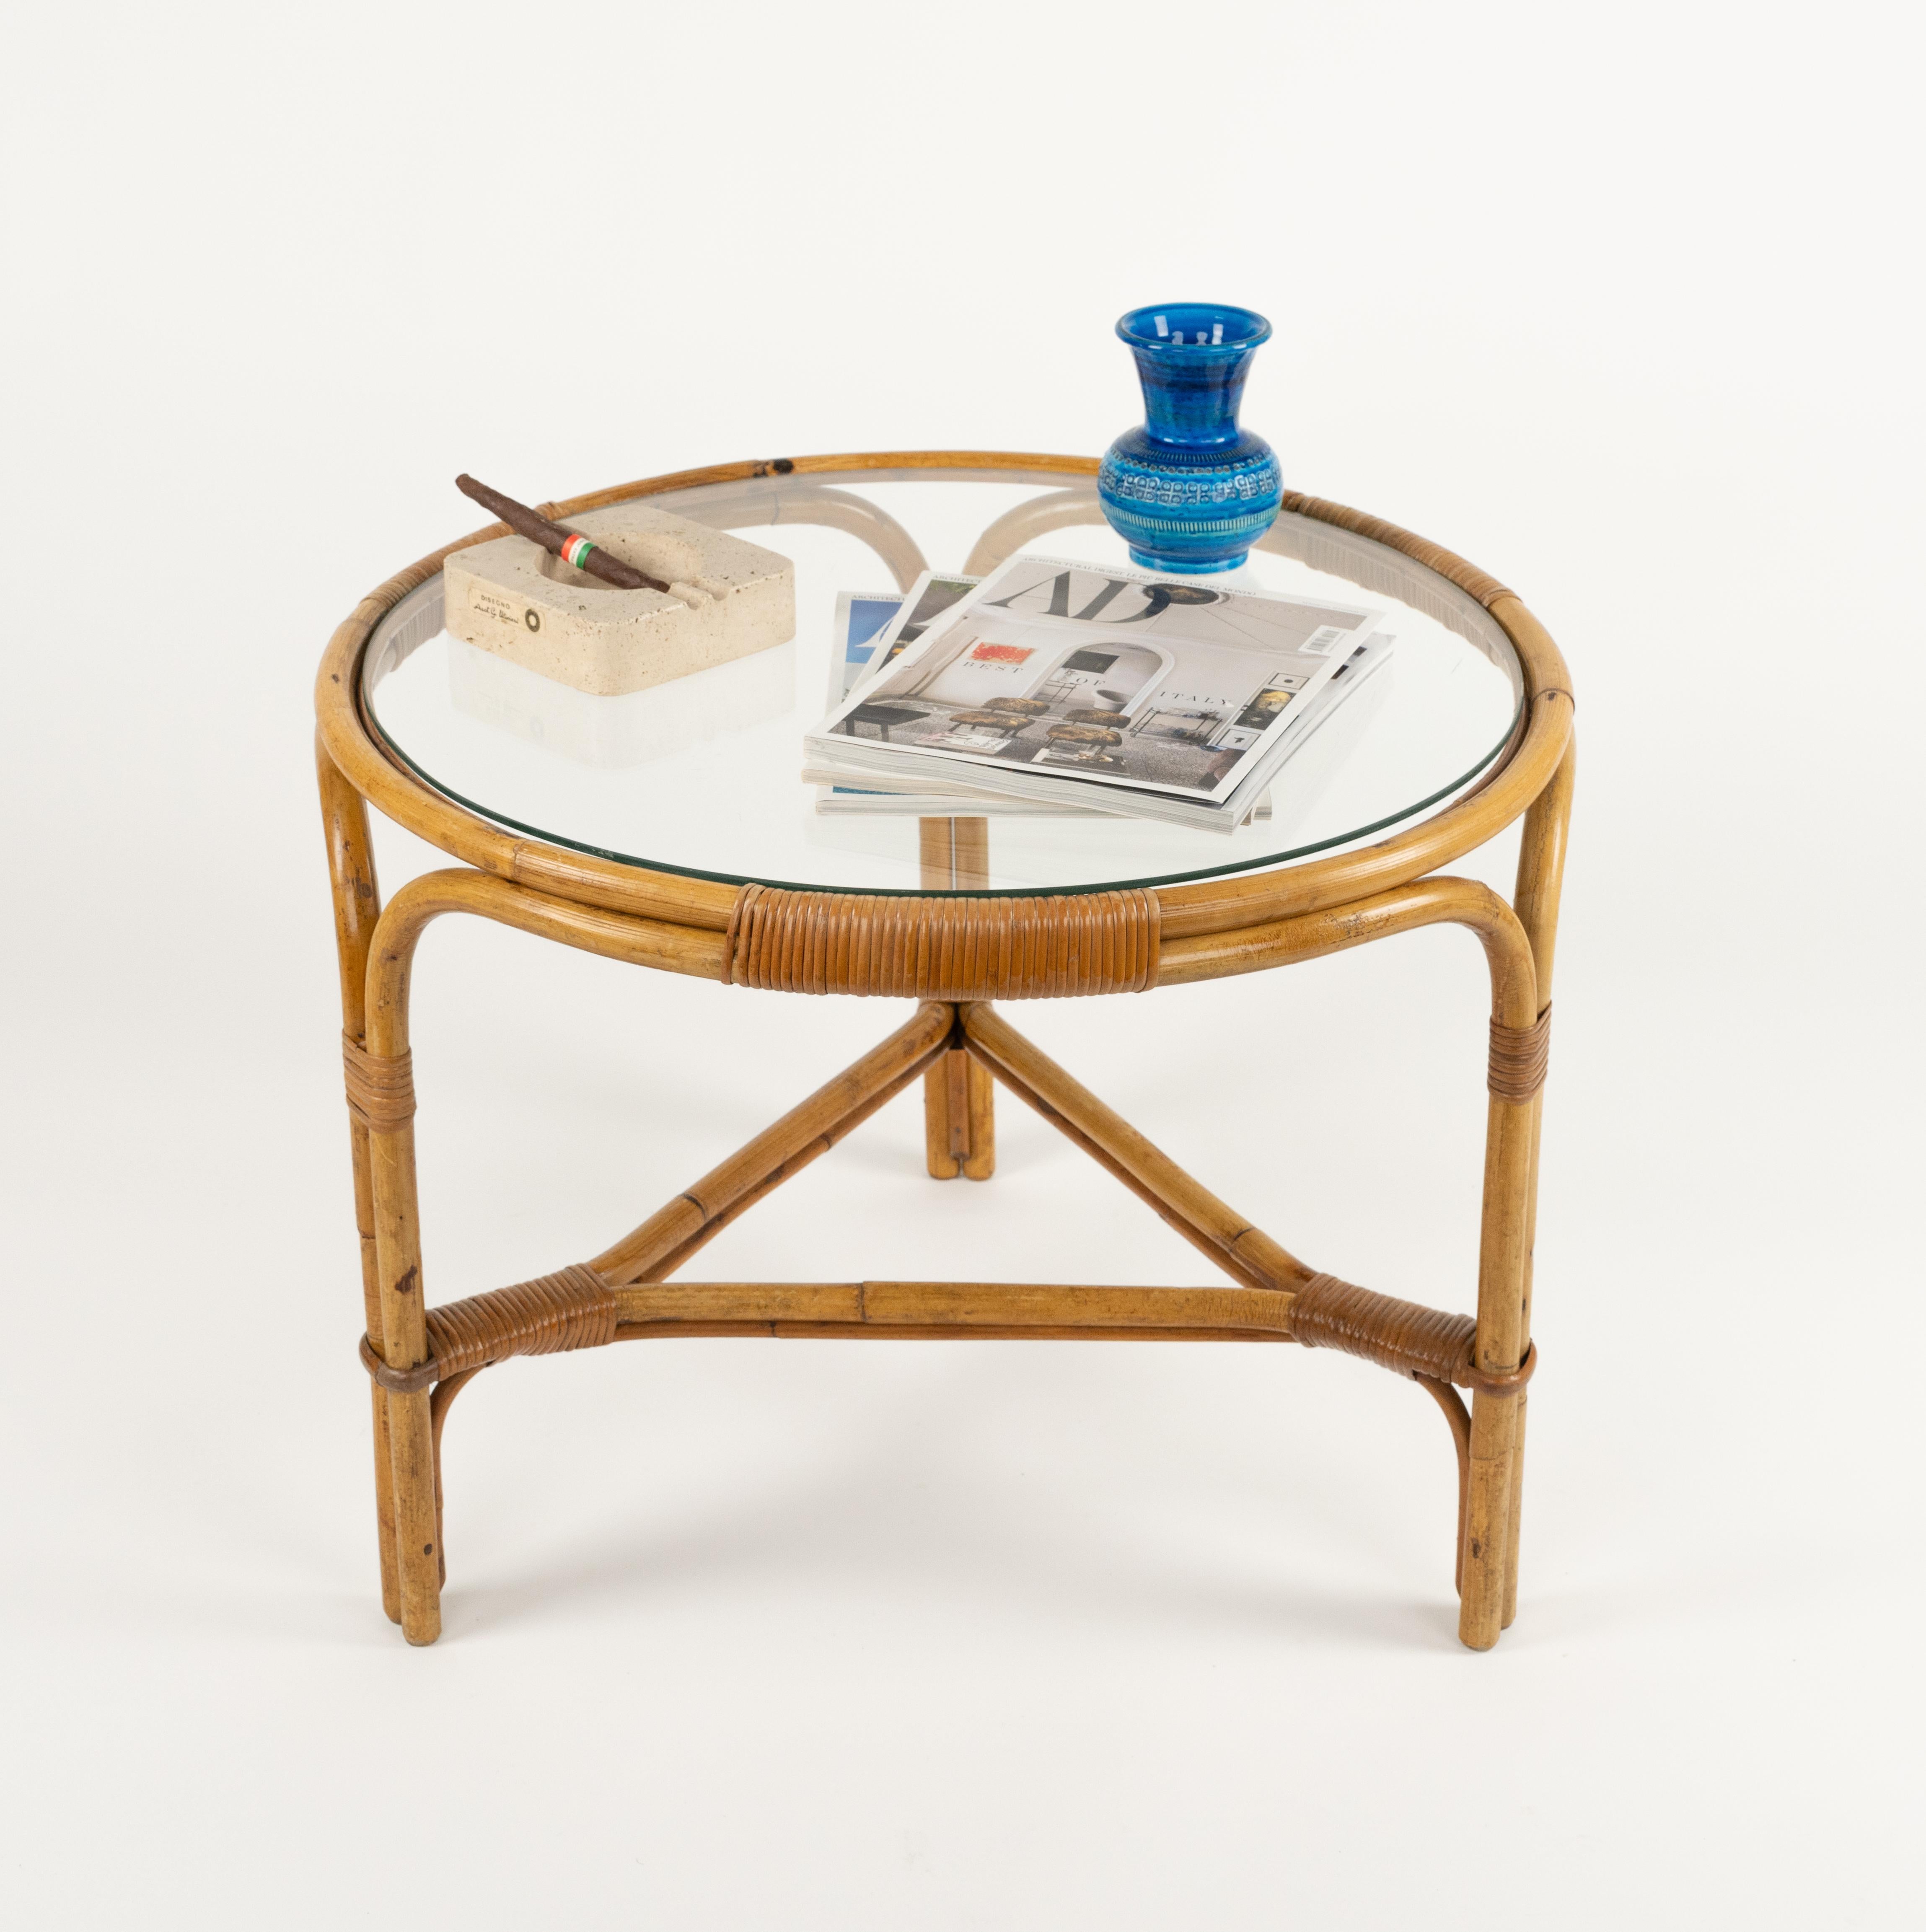 Midcentury Round Coffee Table in Bamboo, Rattan and Glass, Italy 1960s For Sale 4